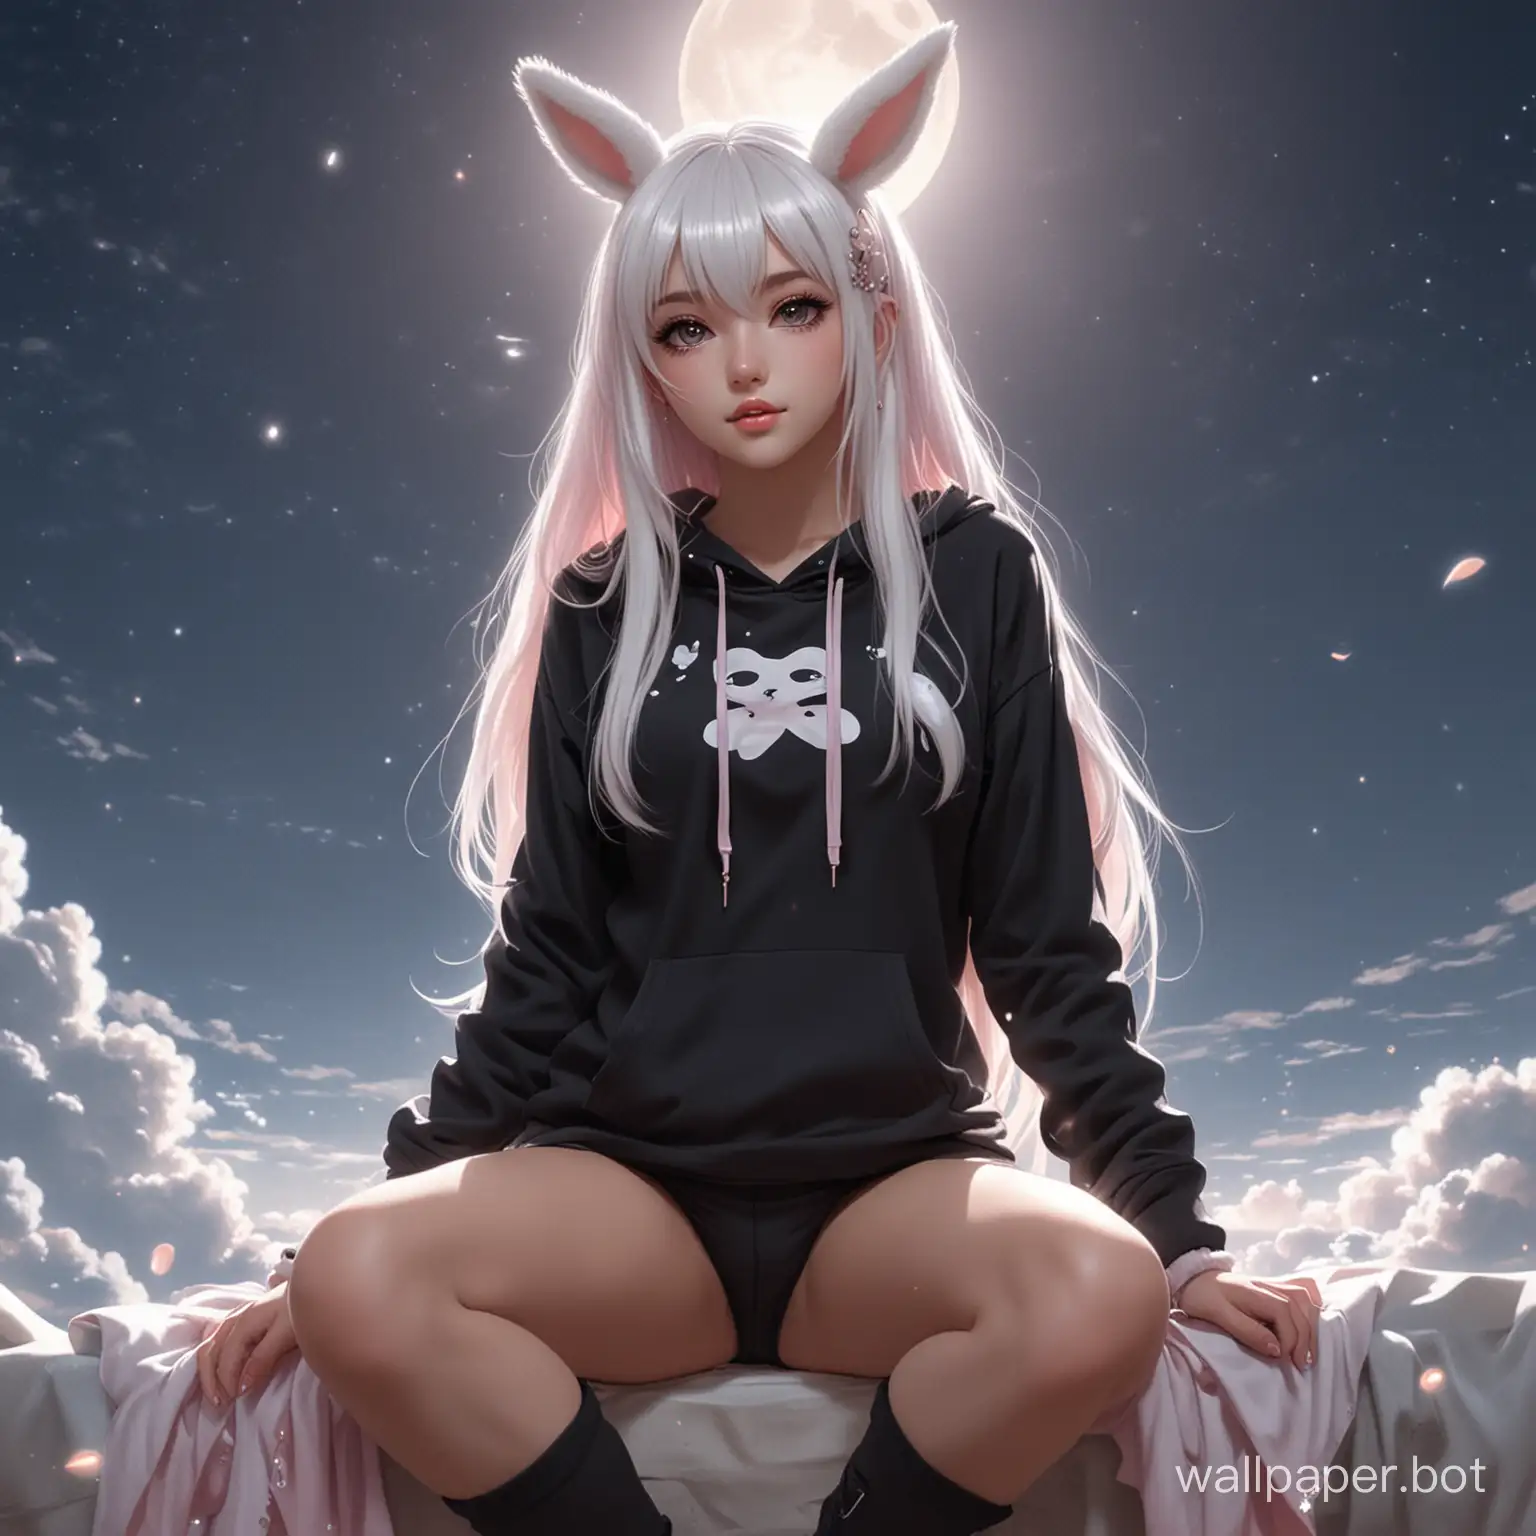 Ethereal-WhiteHaired-Goddess-in-Black-Bunny-Hoodie-Beneath-Moonlight